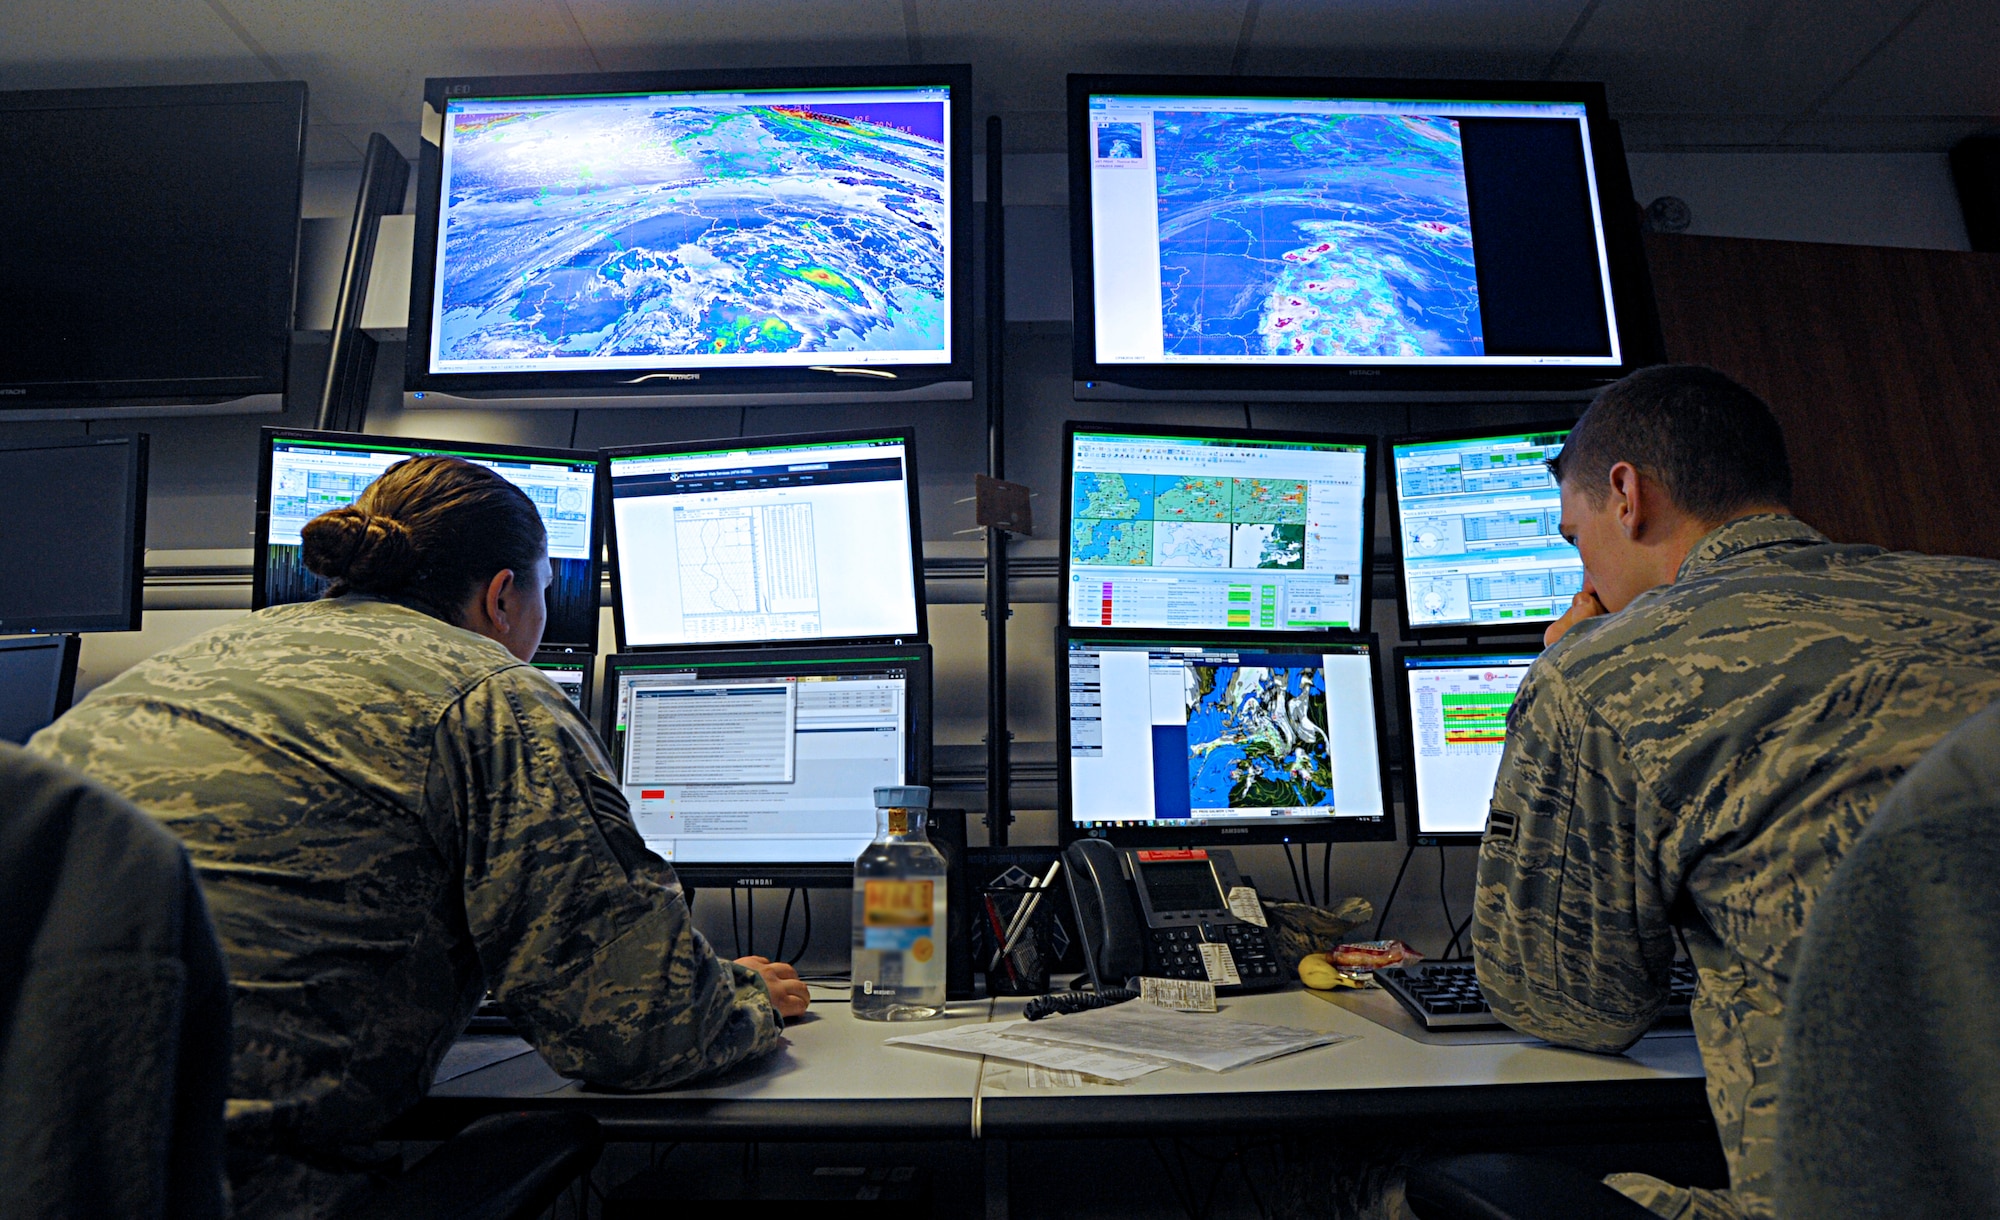 Senior Airman Amanda Diaz, left, and Airman 1st Class Aaron Wolak, both 21st Operational Weather Squadron weather forecasters, monitor the weather patterns of northern Europe Feb. 22, 2016, at Kapaun Air Station, Germany. The mission of the 21st OWS is to provide timely and accurate forecast products to customers across the areas of responsibility of U.S. European Command and U.S. Africa Command. (U.S. Air Force photo/Staff Sgt. Timothy Moore) 